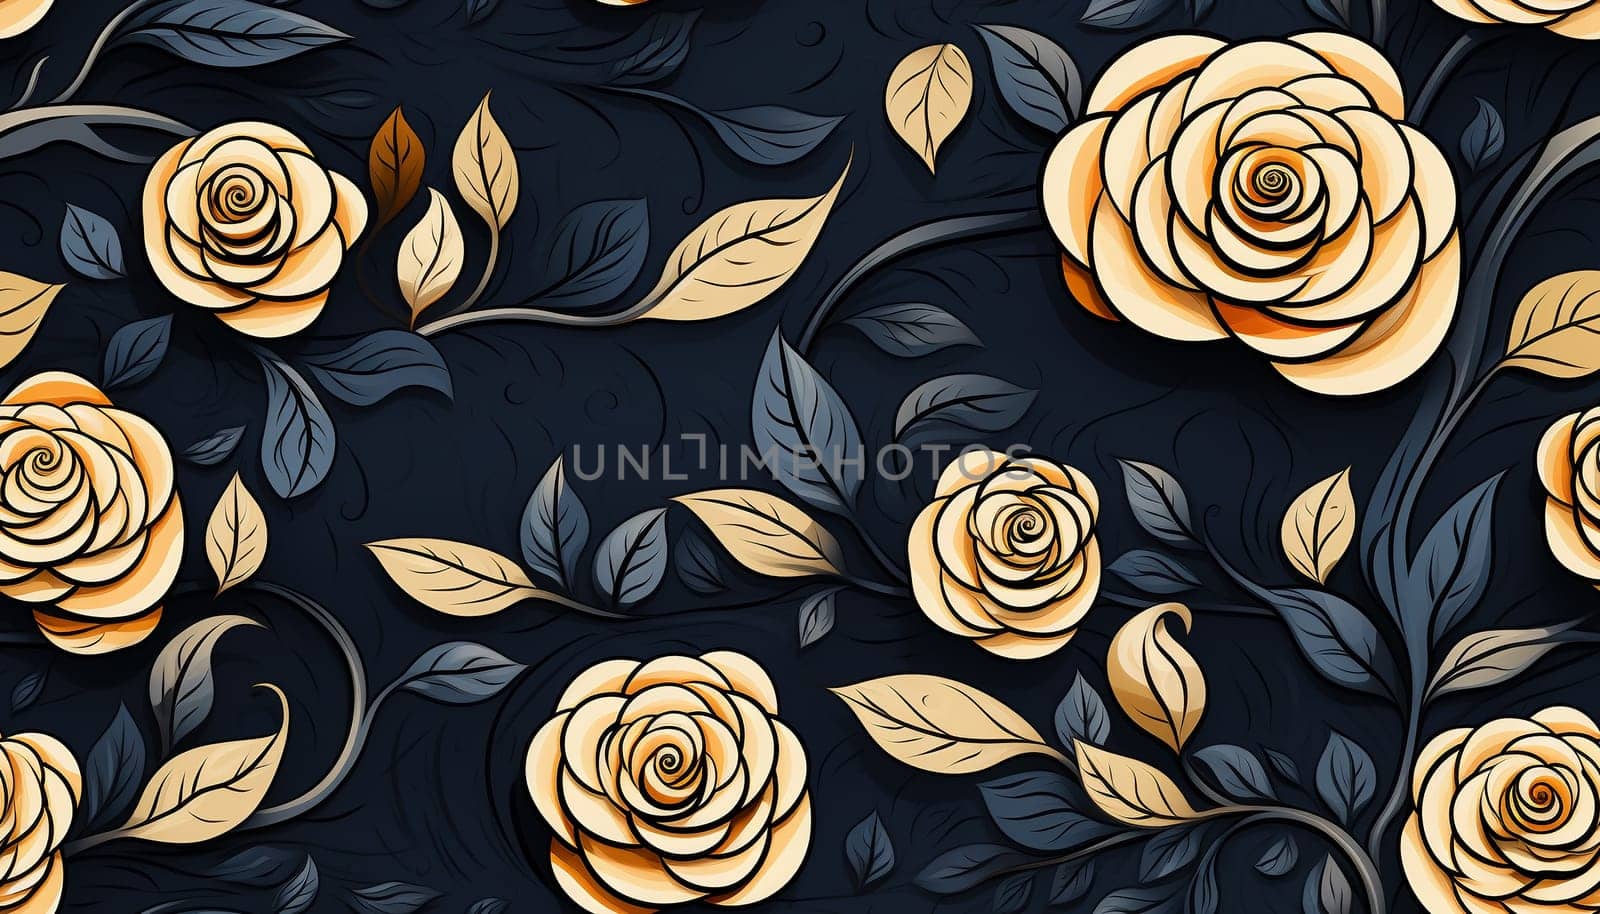 Seamless pattern tile background flowers and floral leaves plants by Nadtochiy